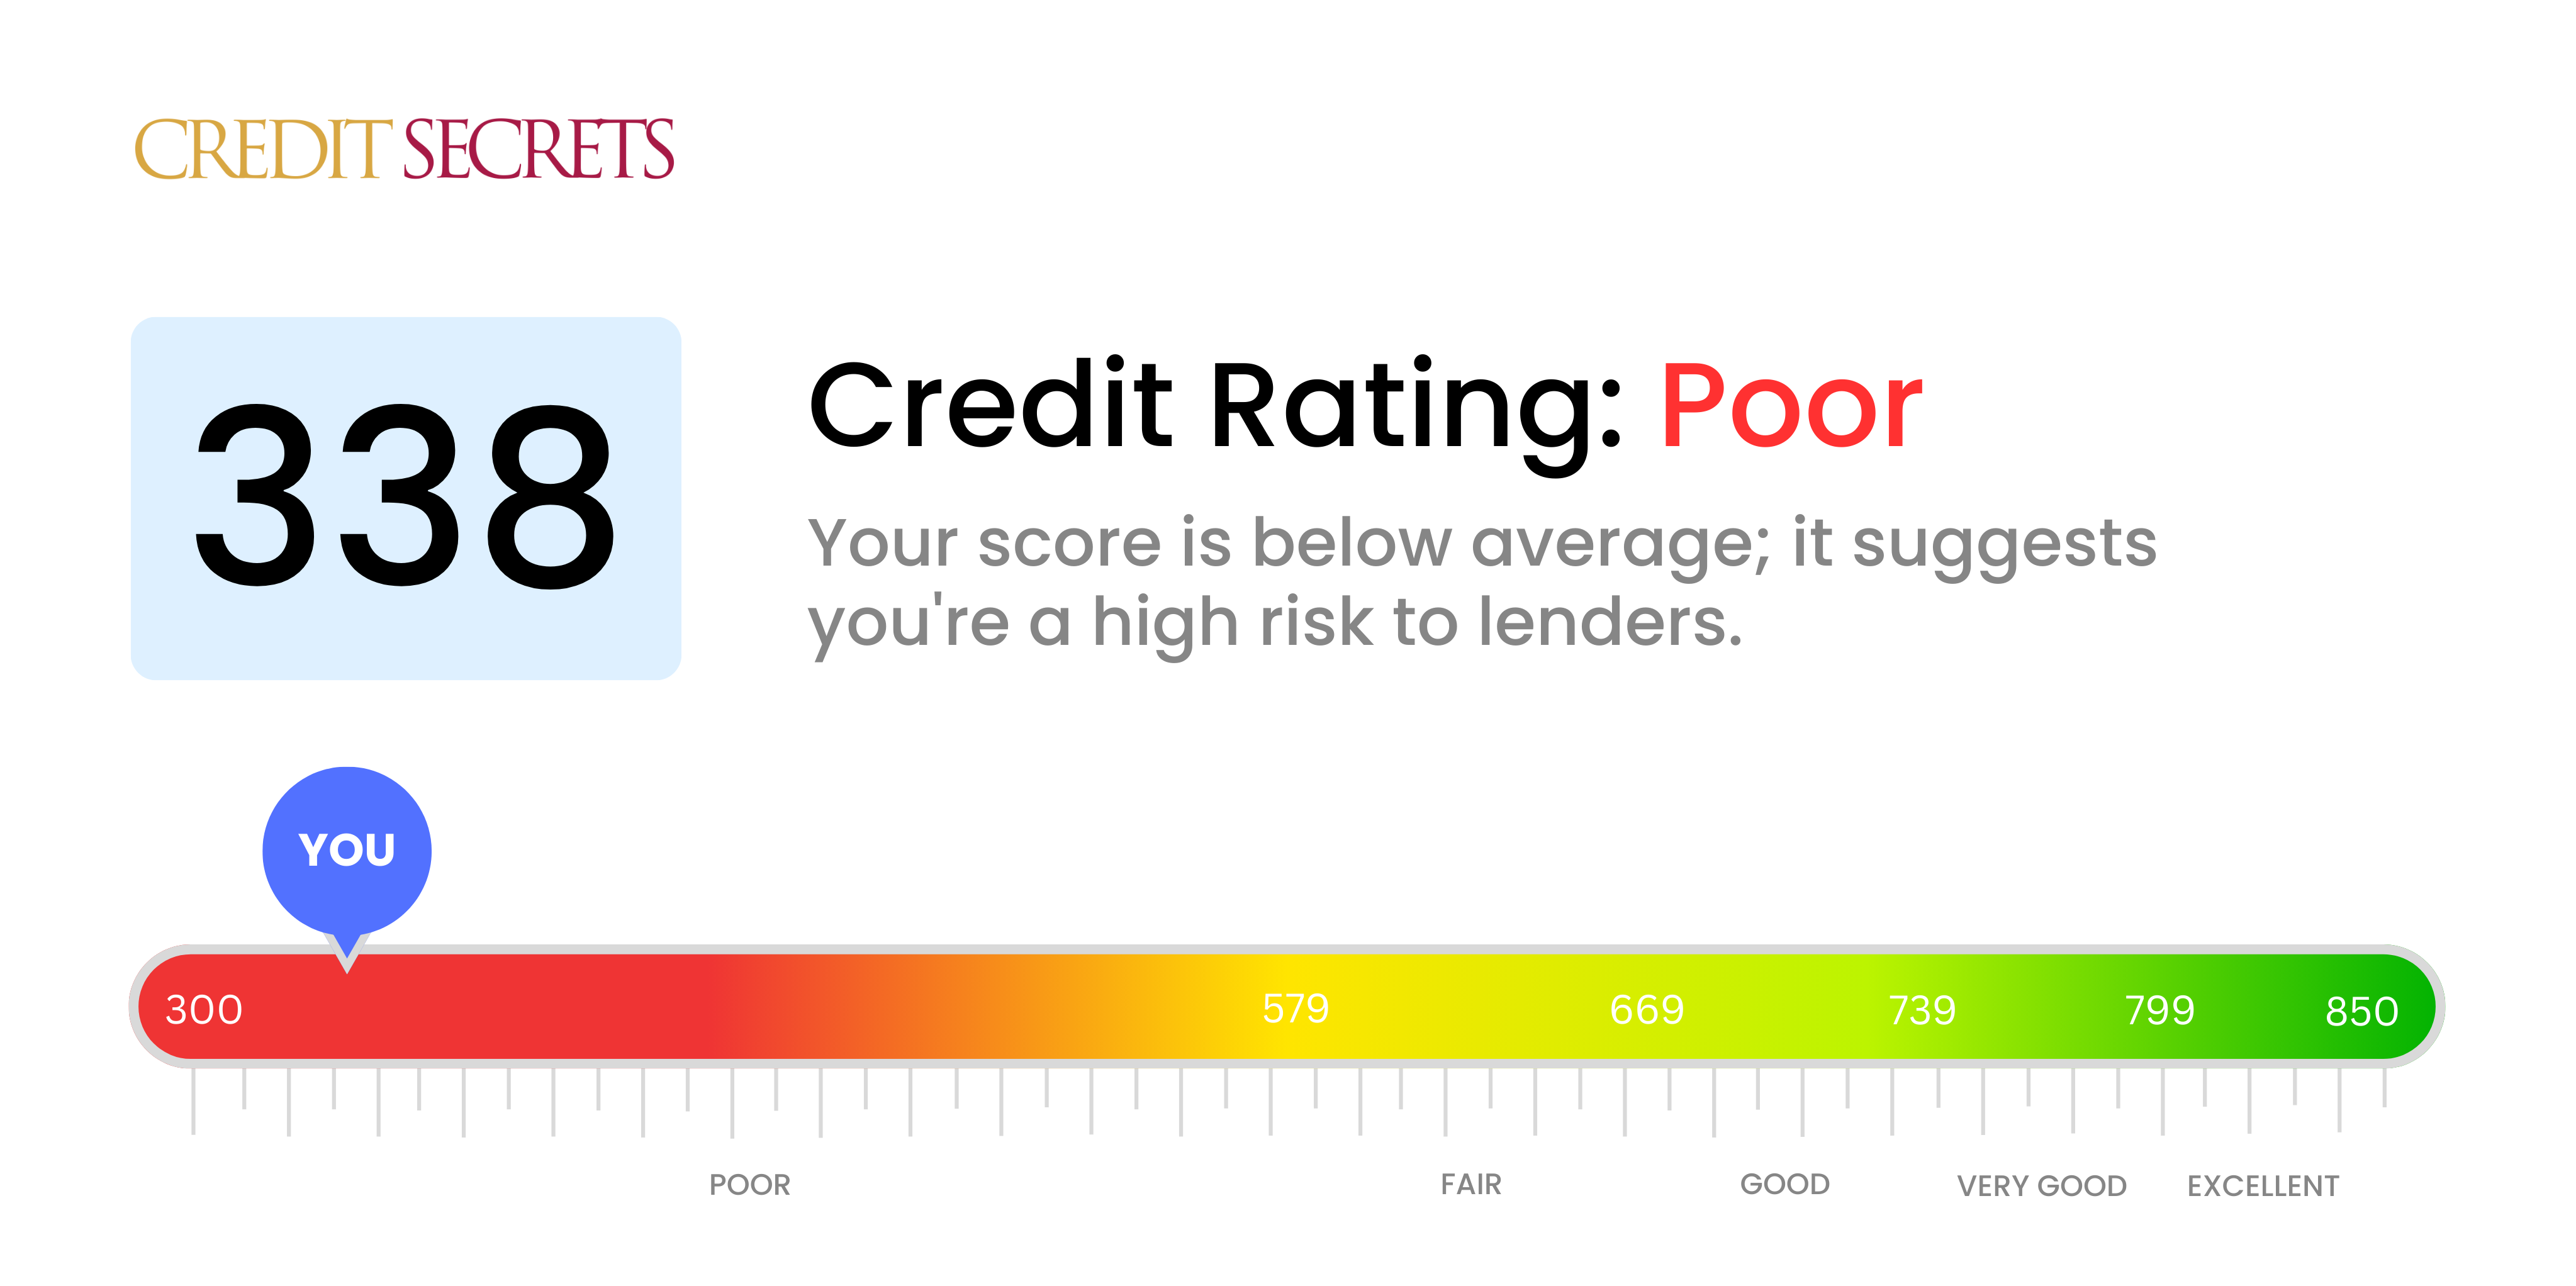 Is 338 a good credit score?